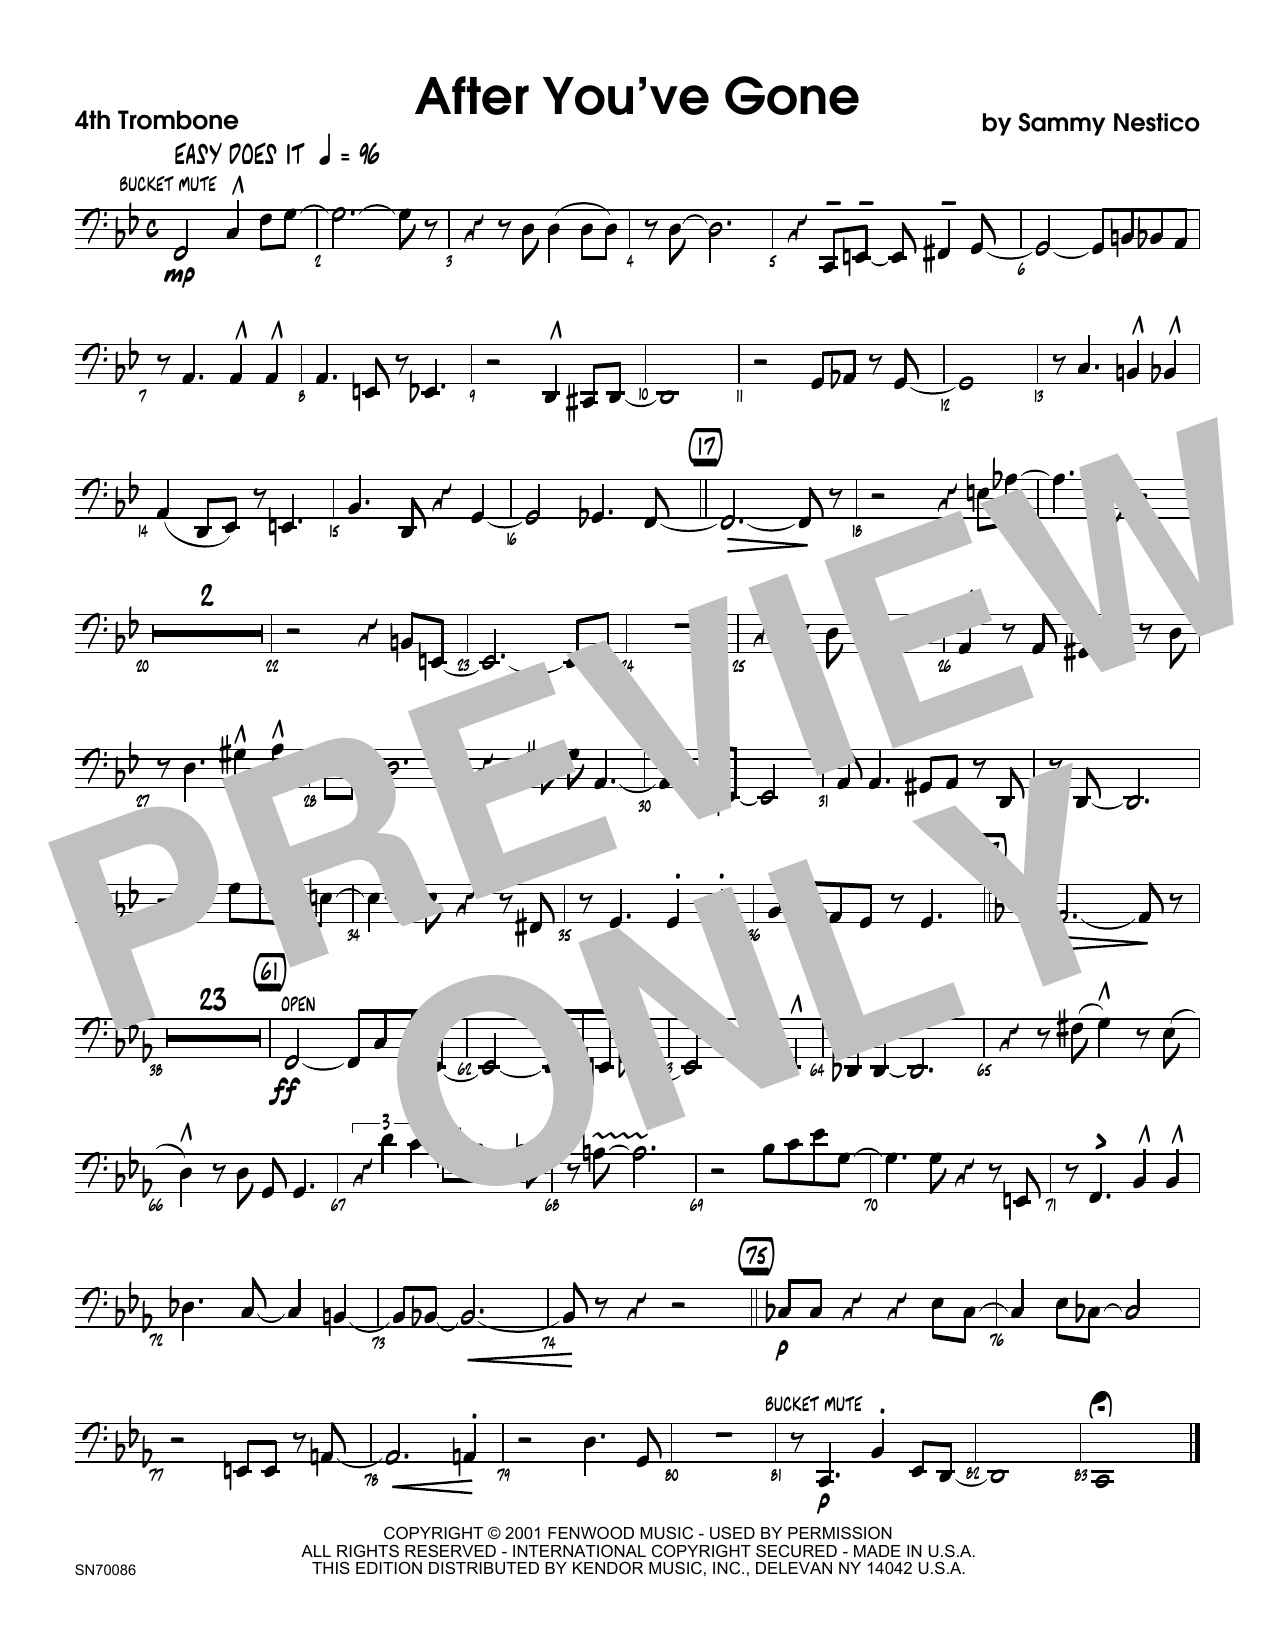 Download Sammy Nestico After You've Gone - 4th Trombone Sheet Music